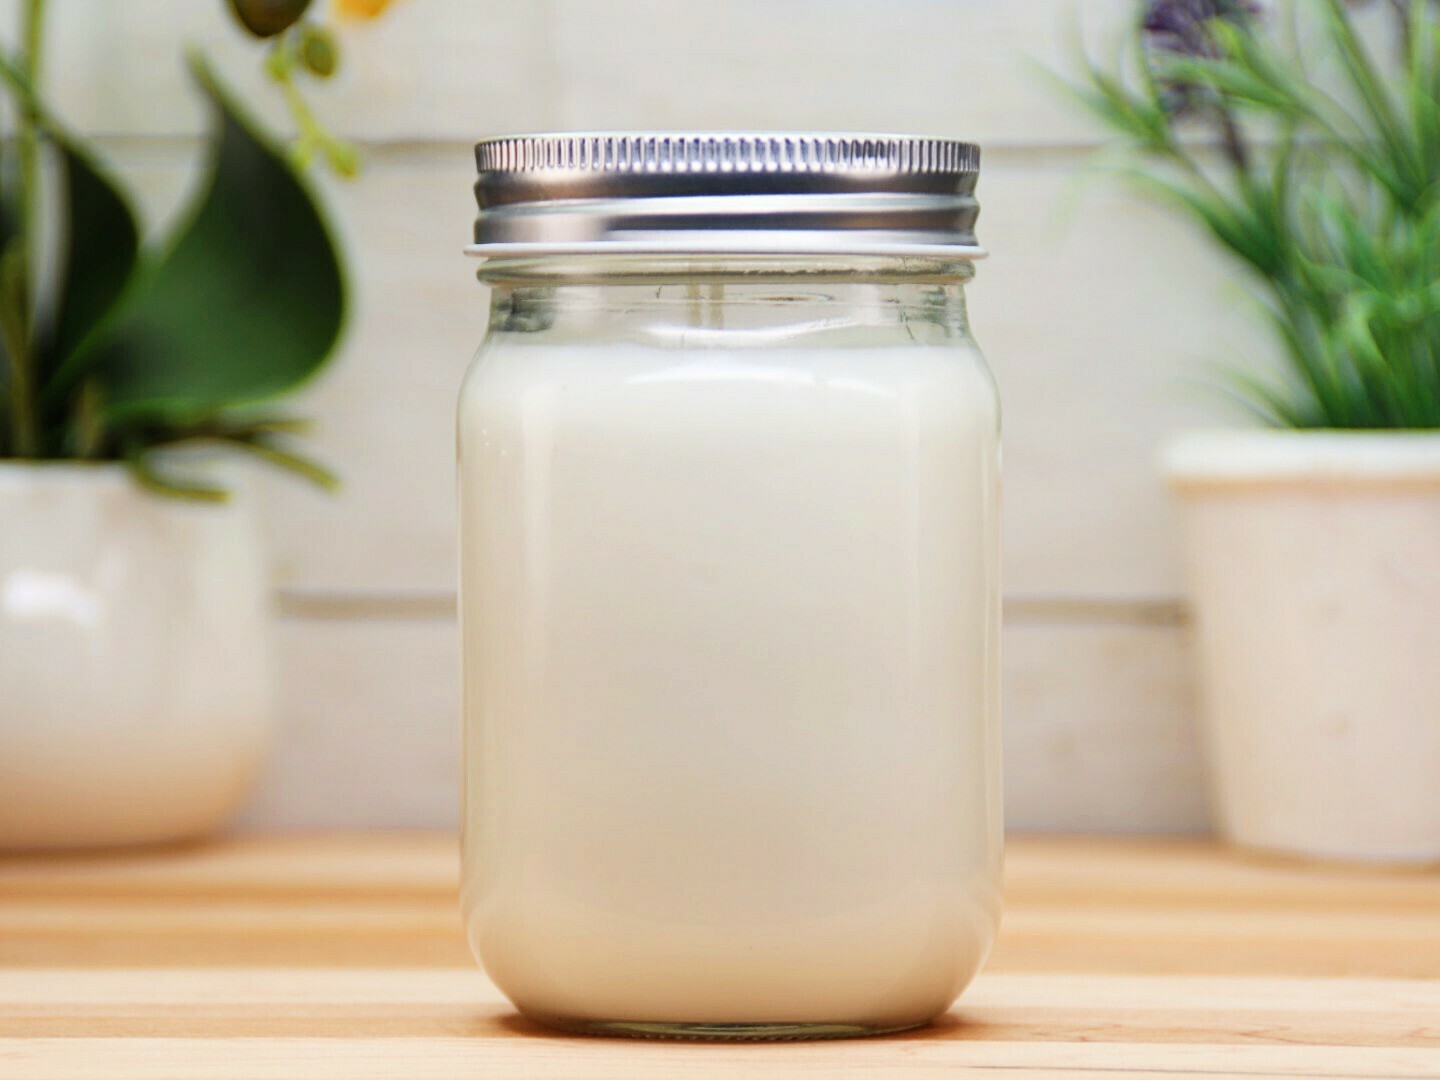 12 oz Aromatherapy Soy Wax Glass Jar Candle with Essential Oils